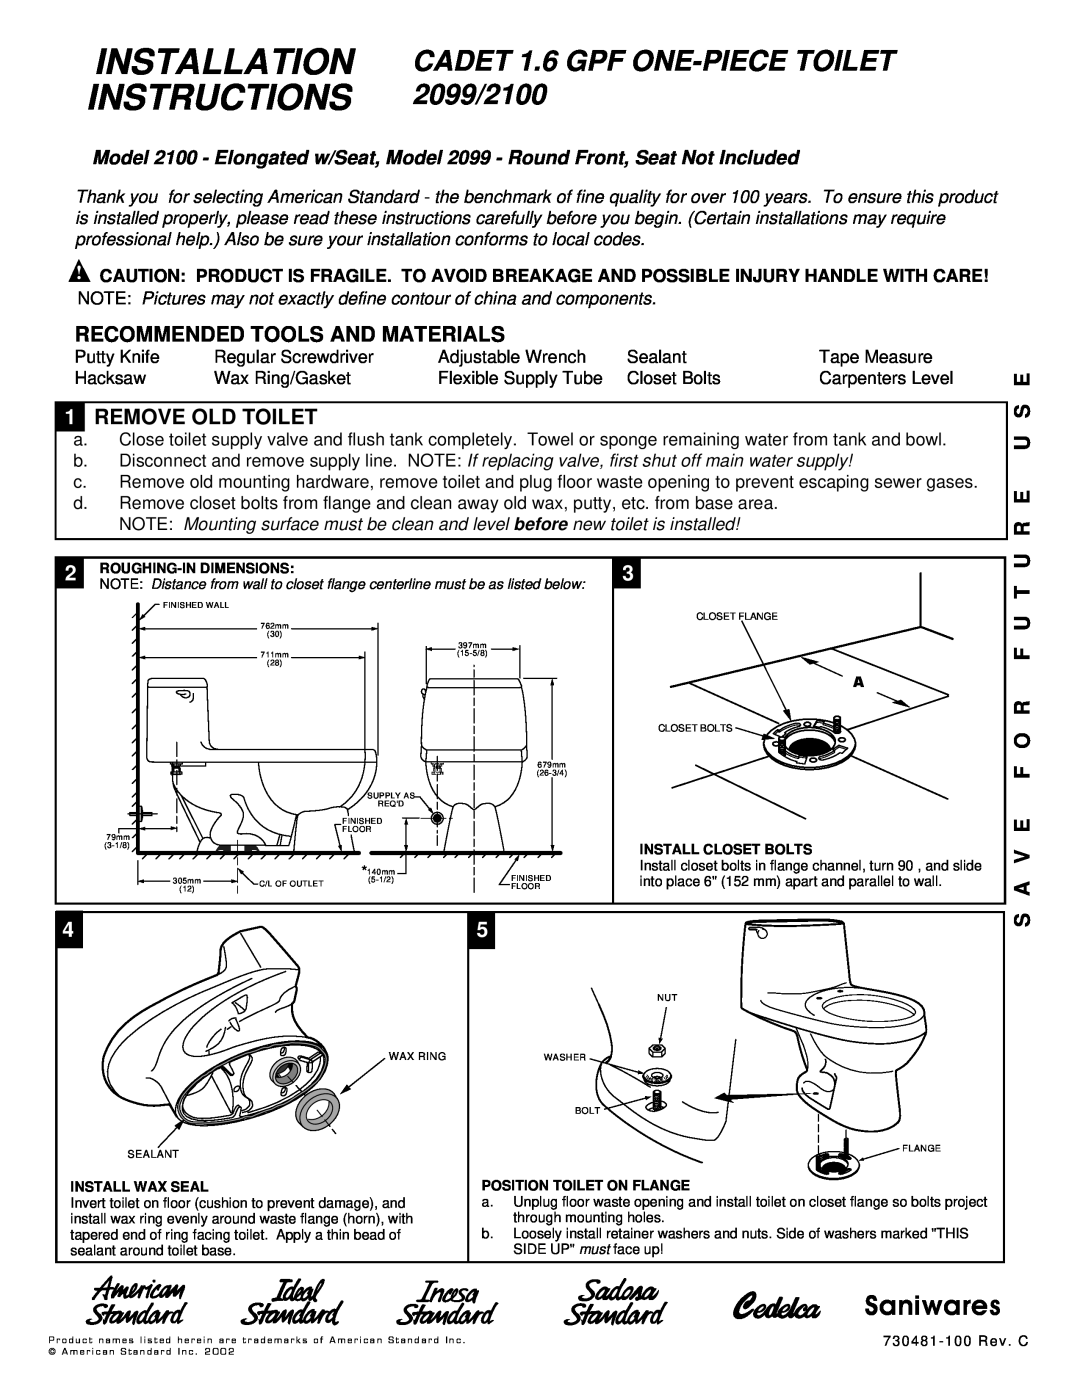 American Standard 2100 installation instructions Recommended Tools And Materials, Remove Old Toilet, U R E U S E 